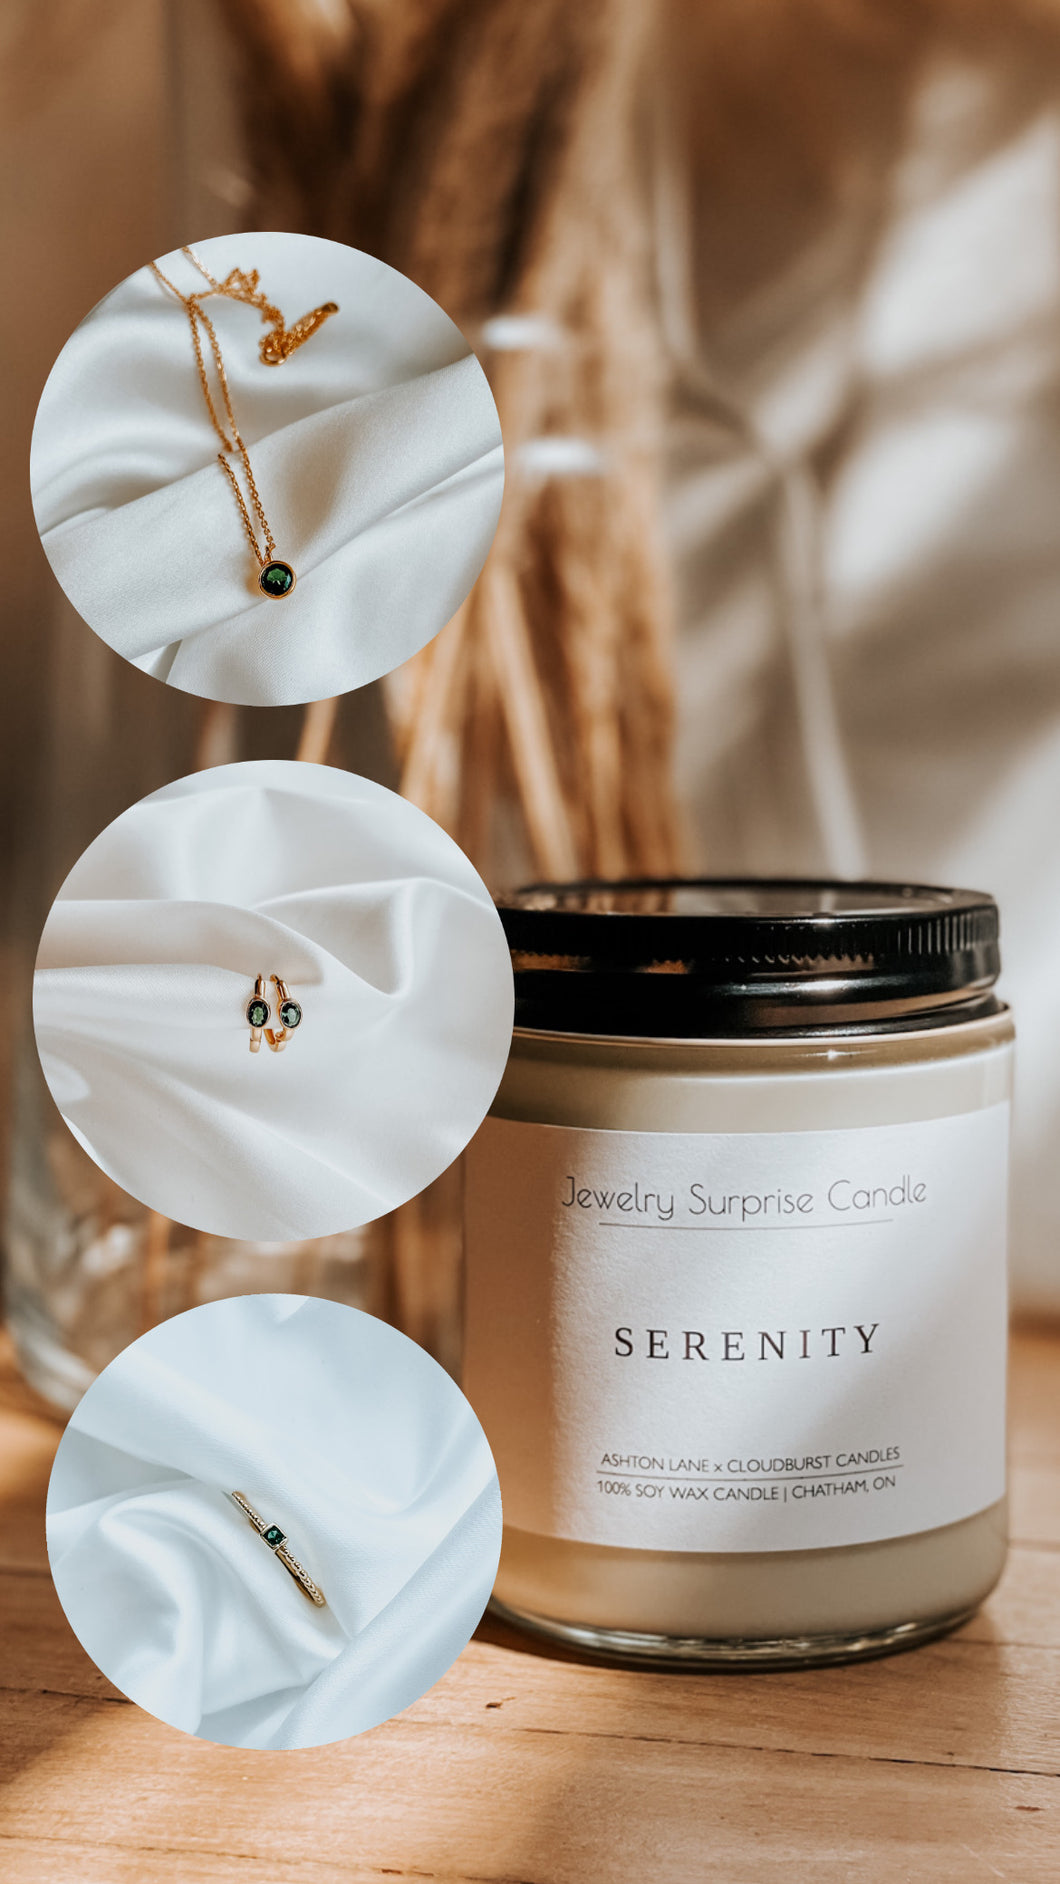 Jewelry Surprise Candle